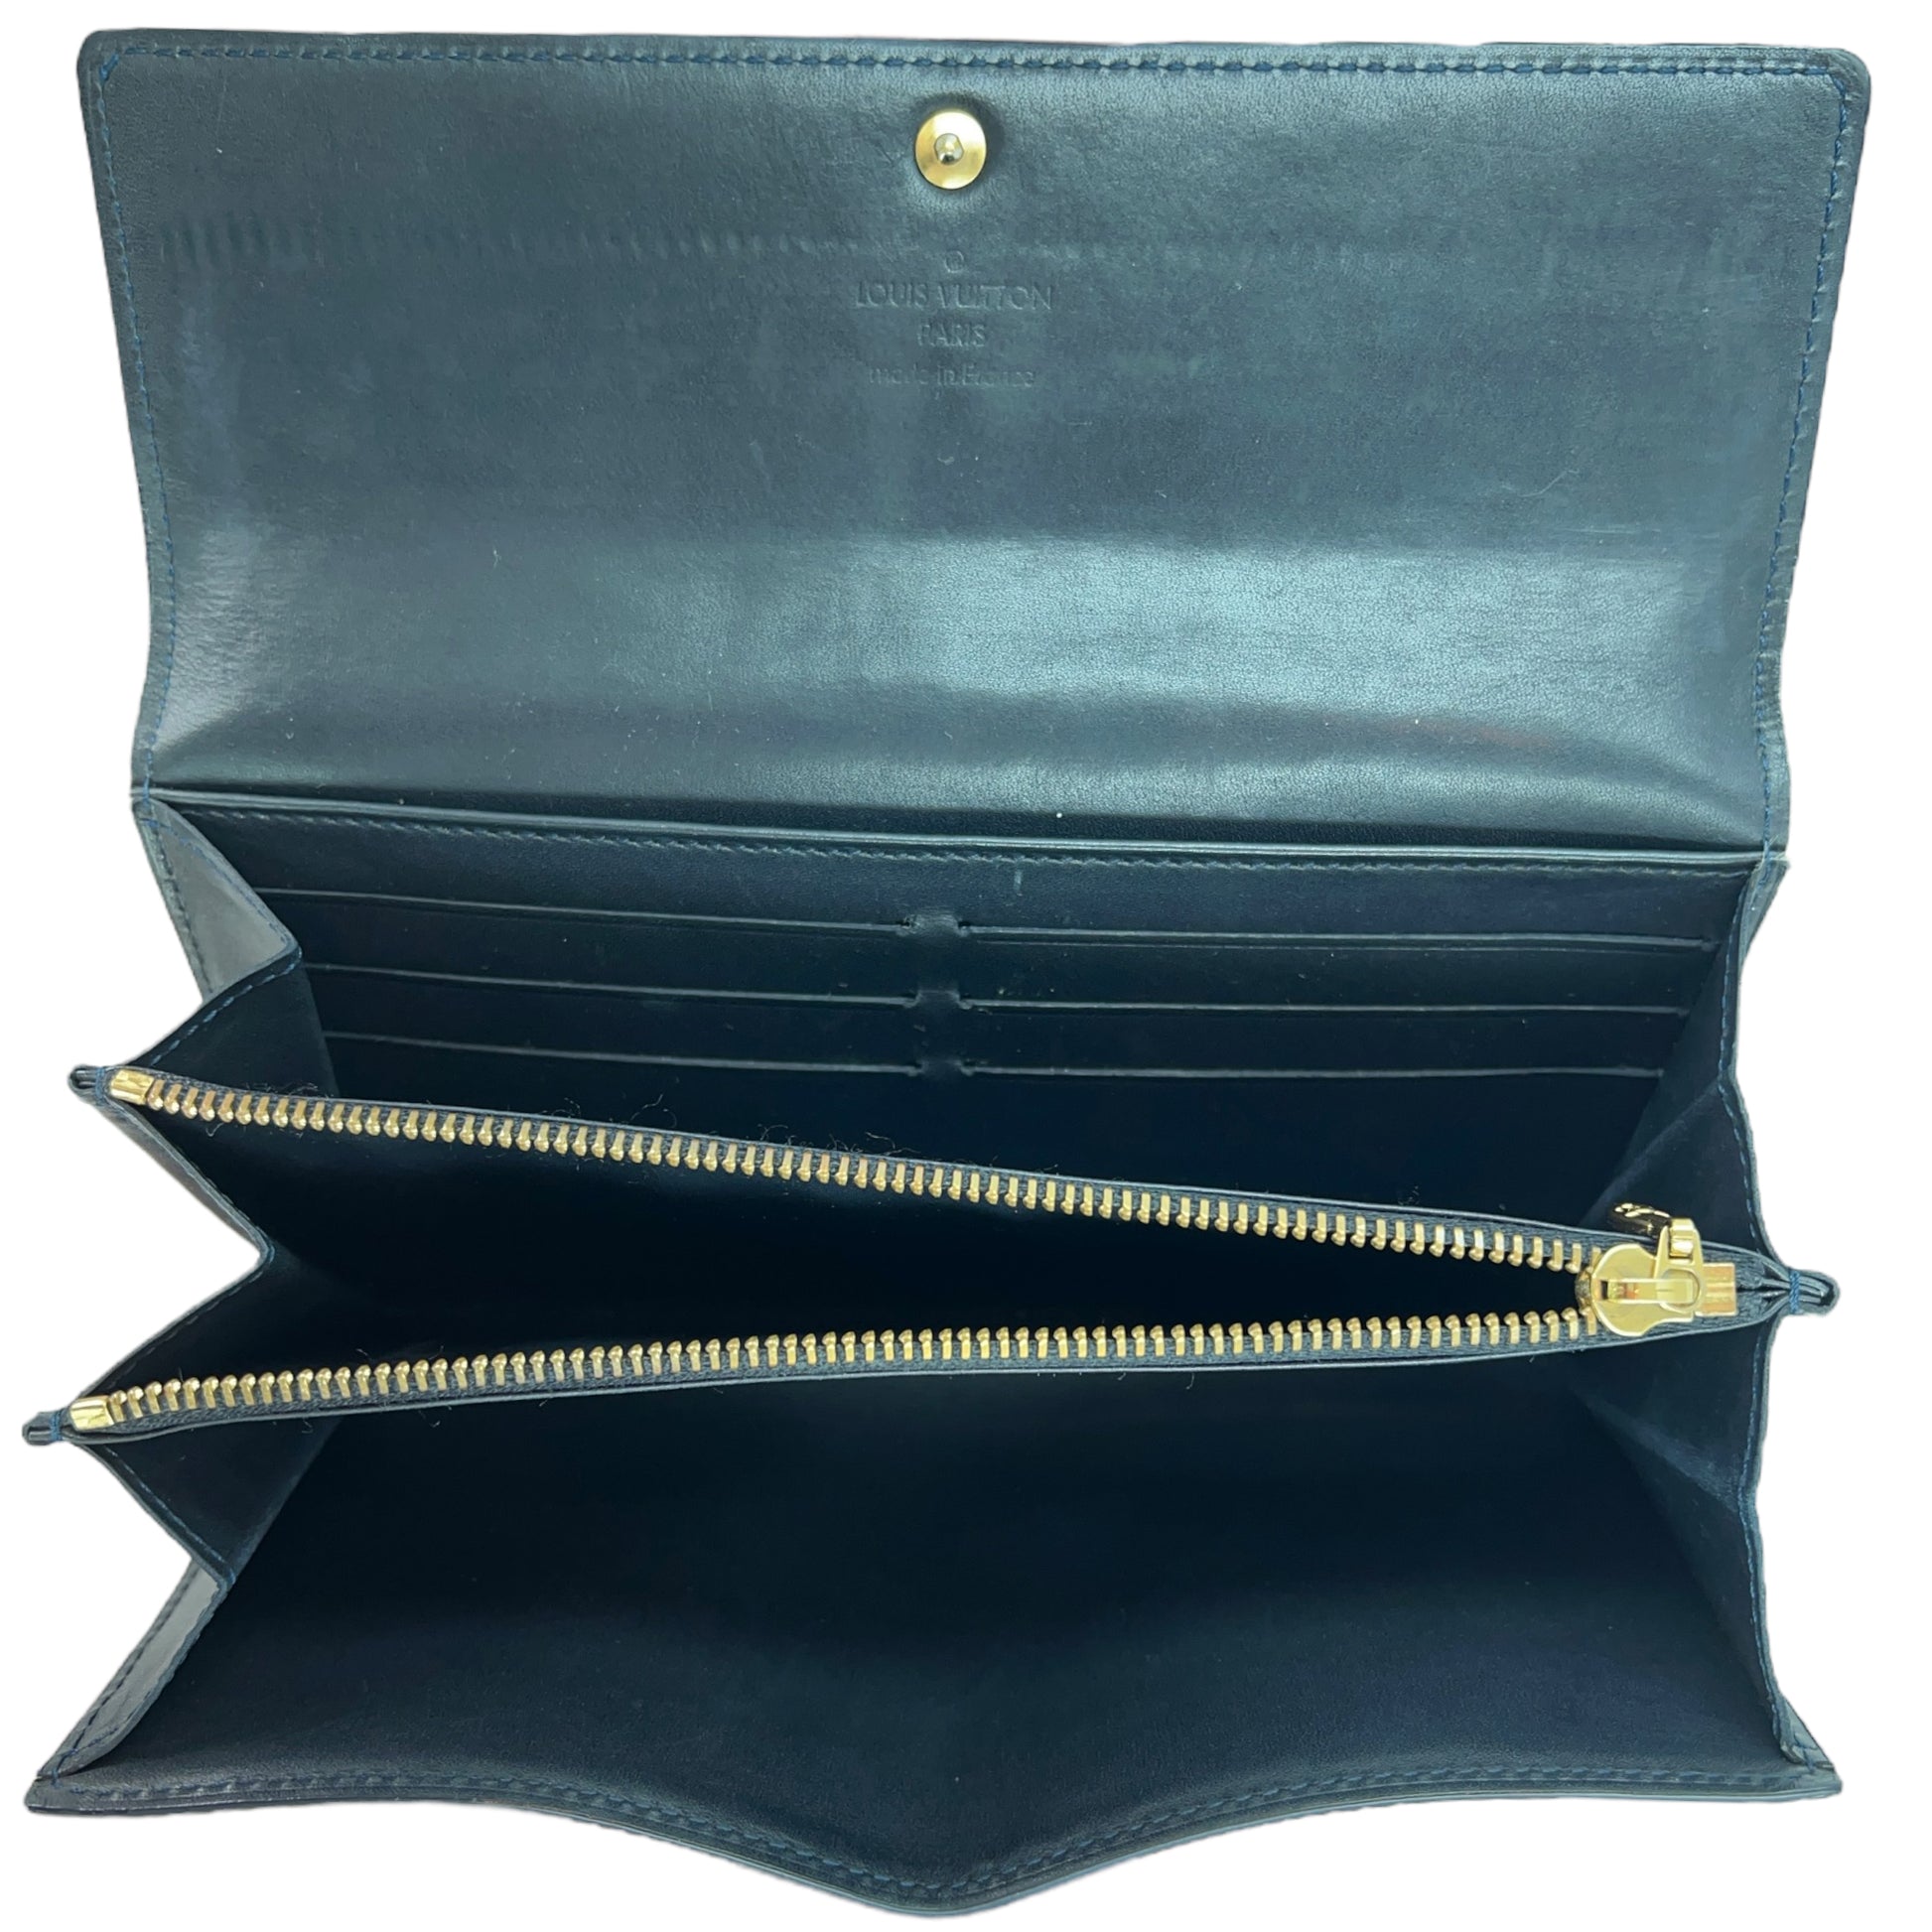 blue and black louis vuittons wallet